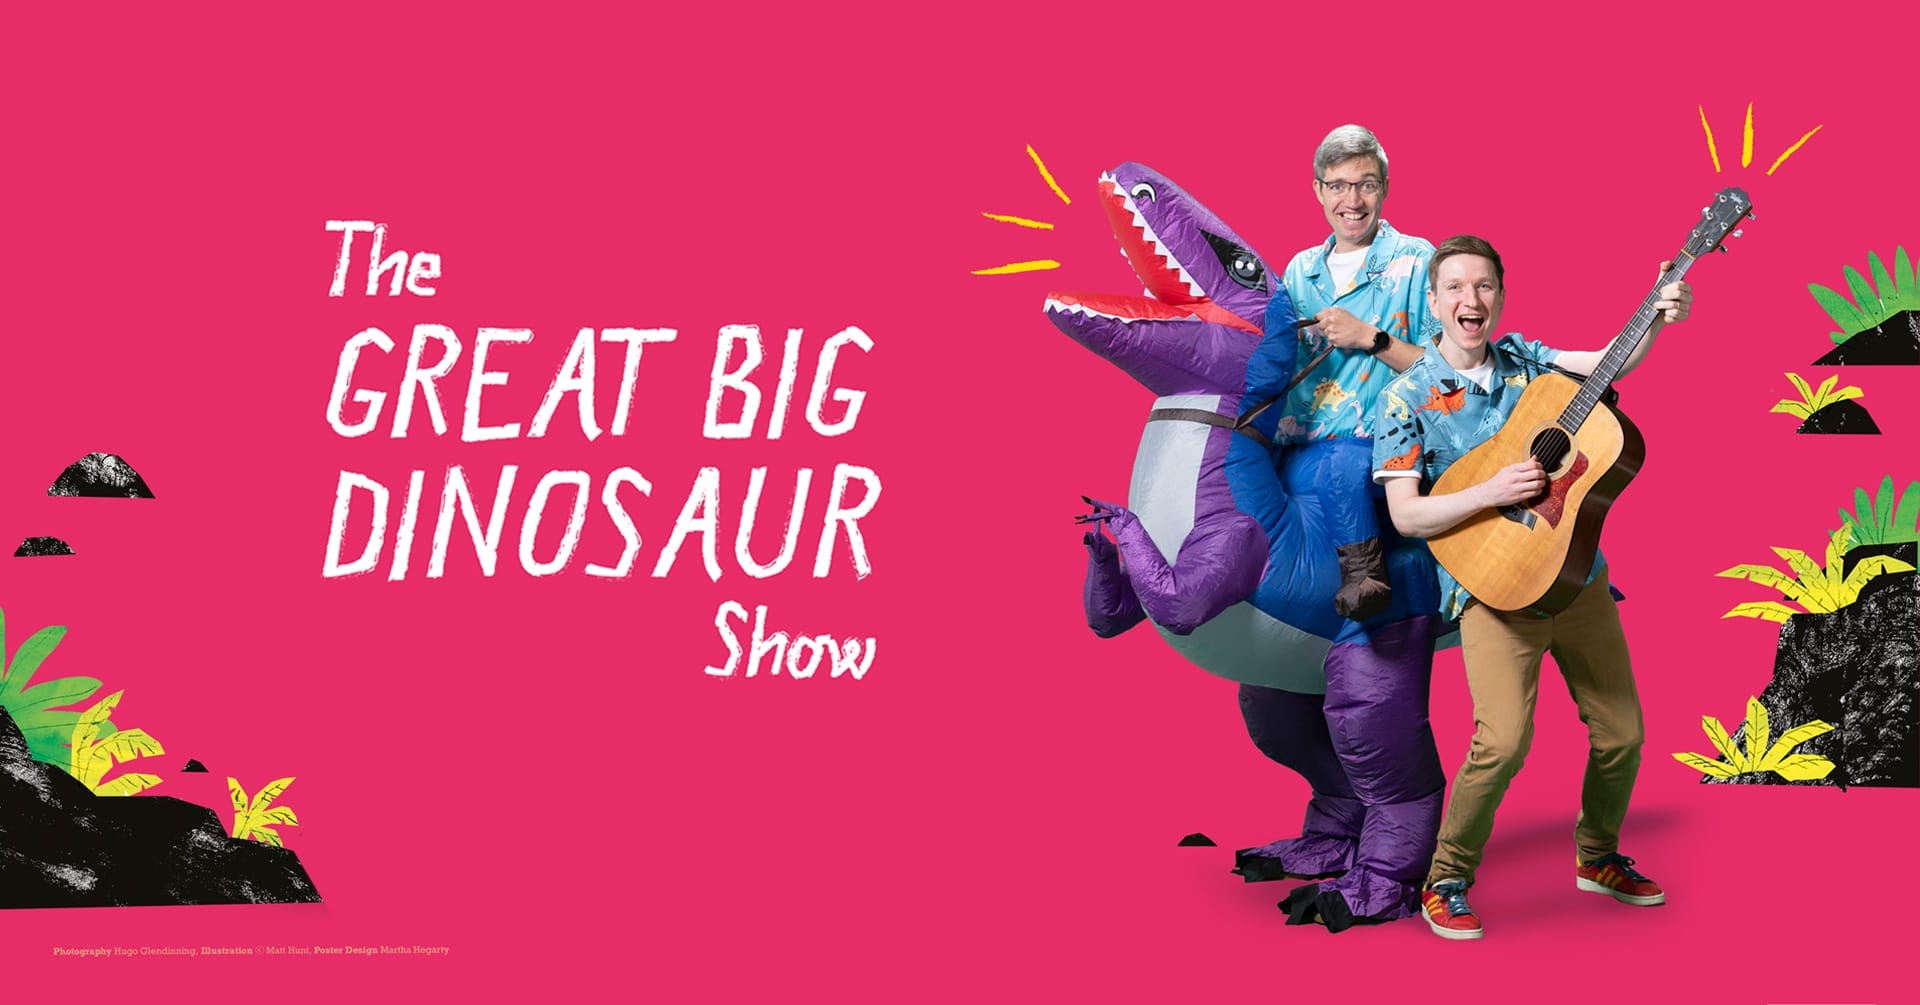 Against a bright pink background Simon Mole, wearing a dinosaur suit, and Gecko, playing an acoustic guitar, stand back to back. White text on the image reads The Great Big Dinosaur Show.